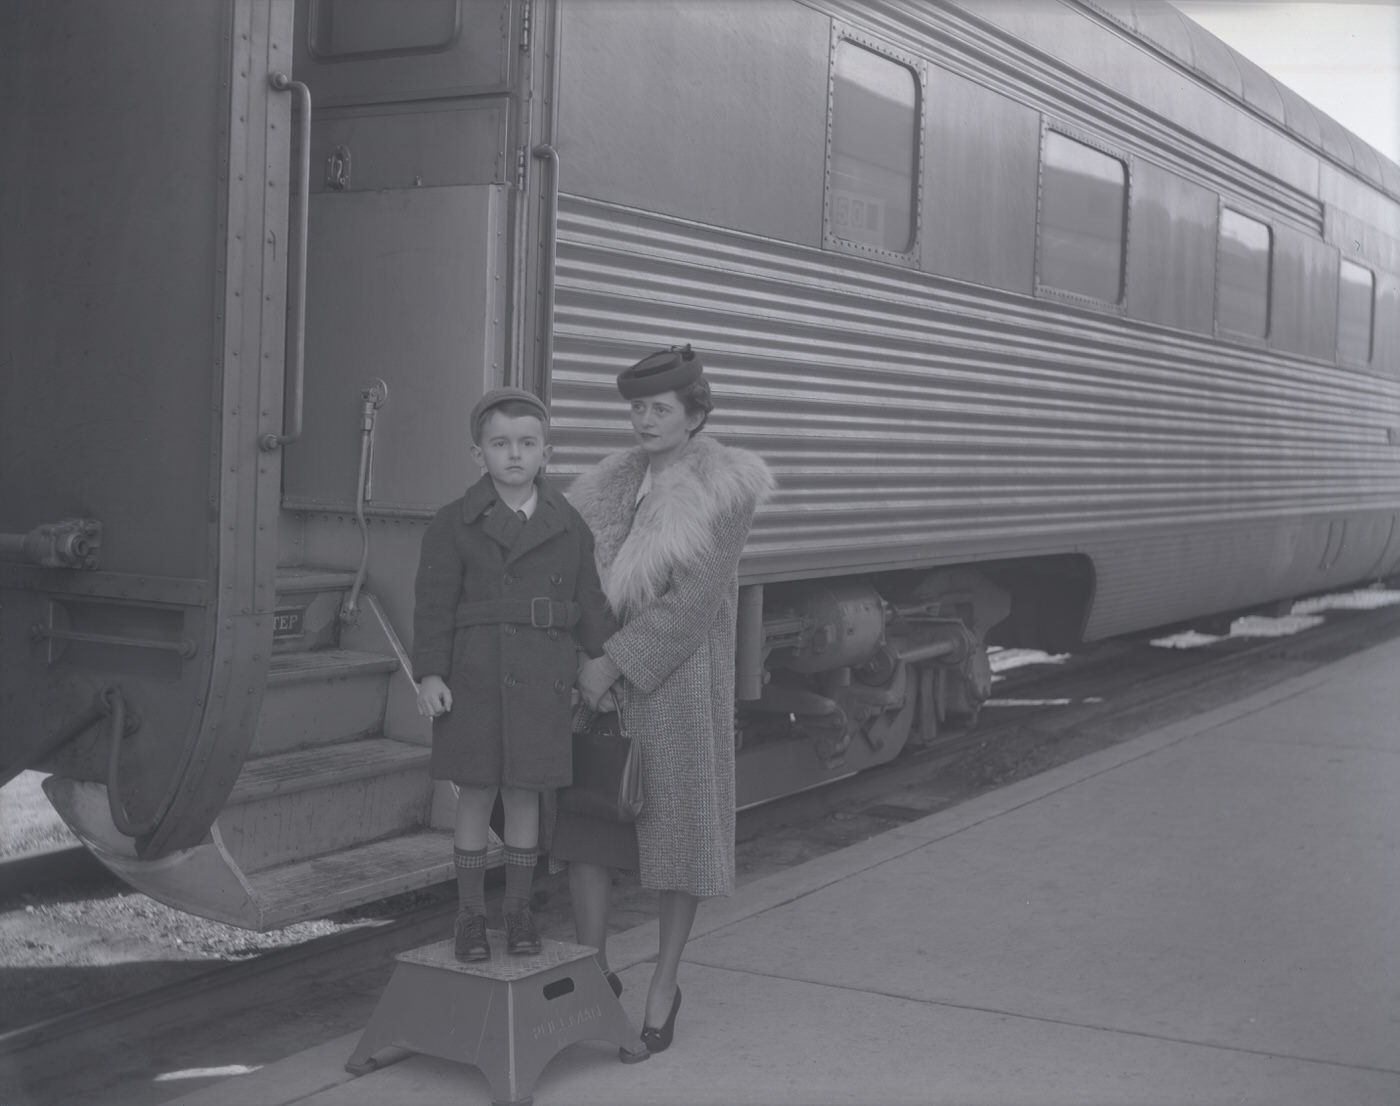 Woman and Young Boy Standing Next to a Santa Fe Train, 1941